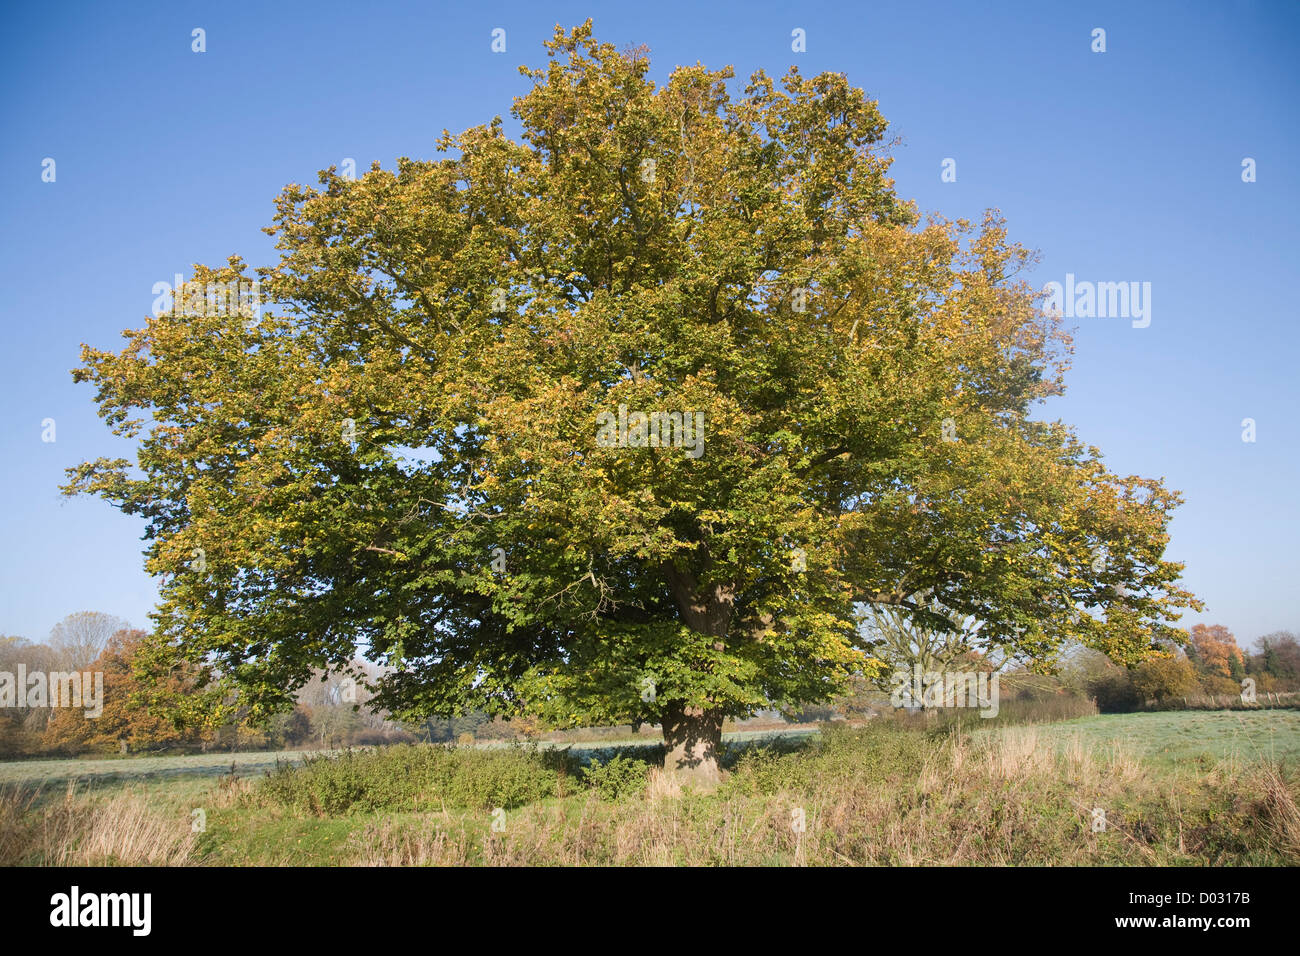 Common lime tree autumn leaf colours standing in field Stock Photo